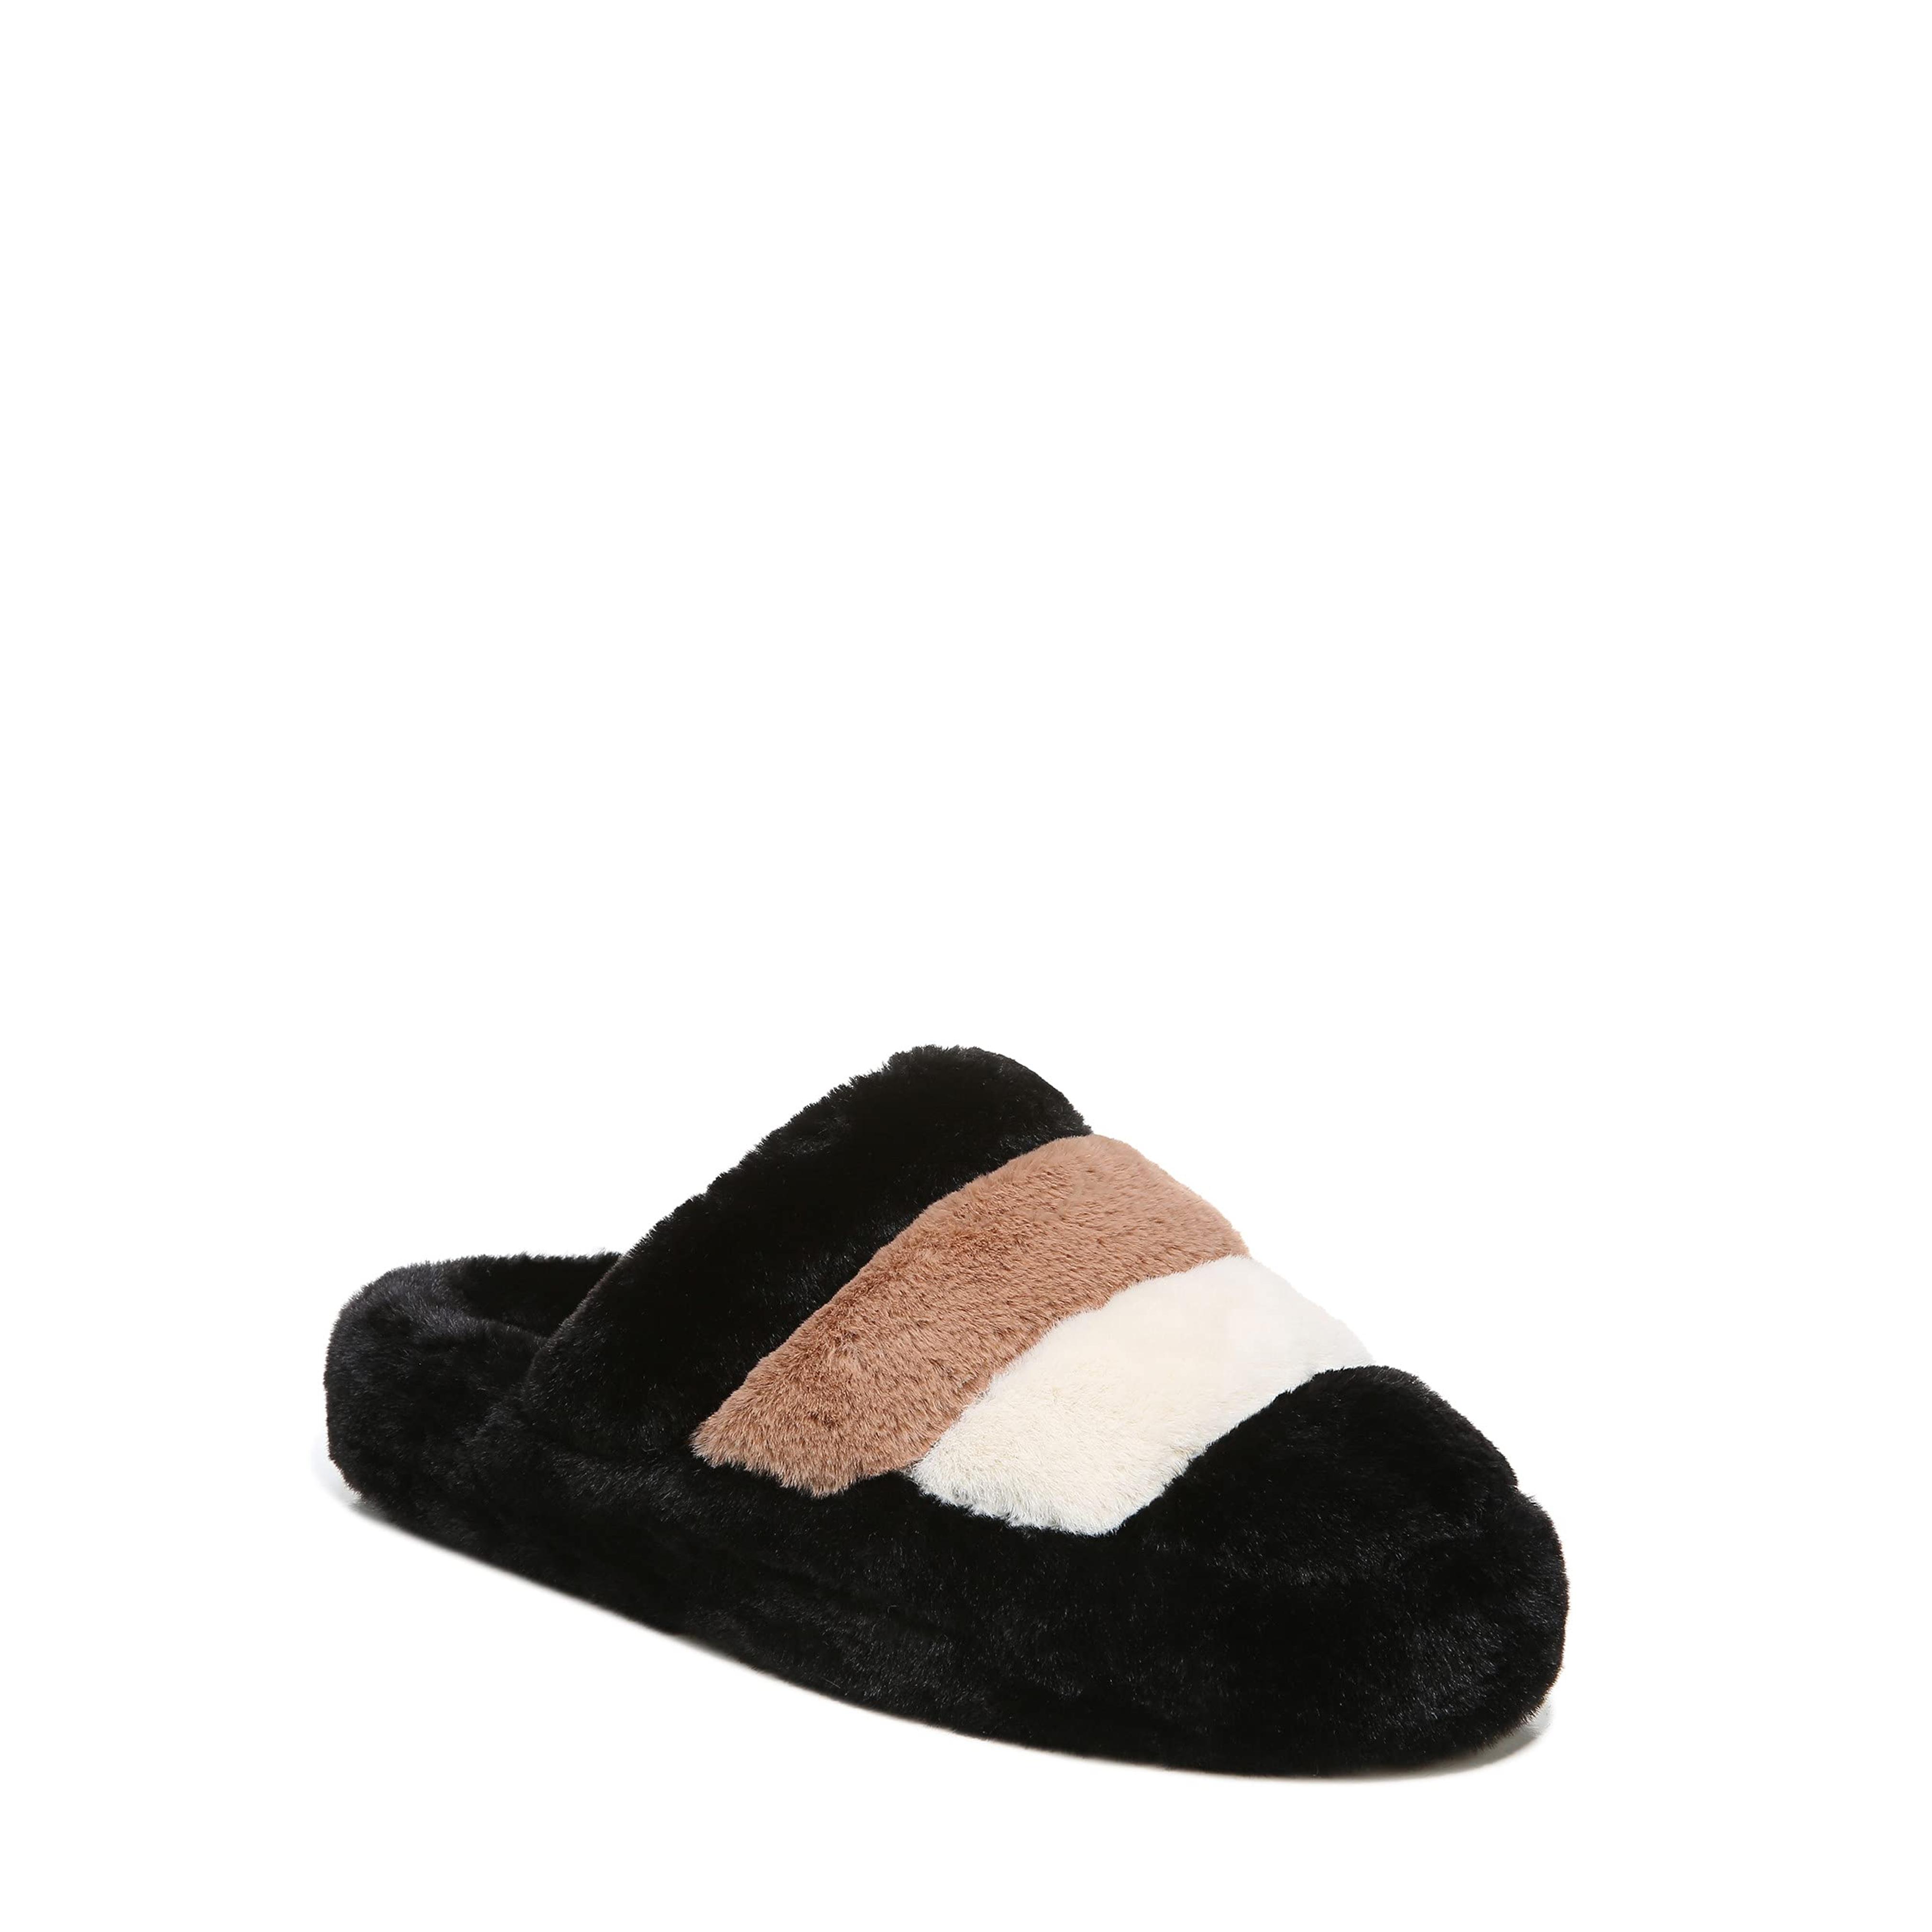 Vionic Karma Cosmina Women's Fuzzy Mule Slipper- Supporting Indoor/Outdoor Slippers that Include Three-Zone Comfort with Orthotic Insole Arch Support, Medium Fit Sizes 5-11